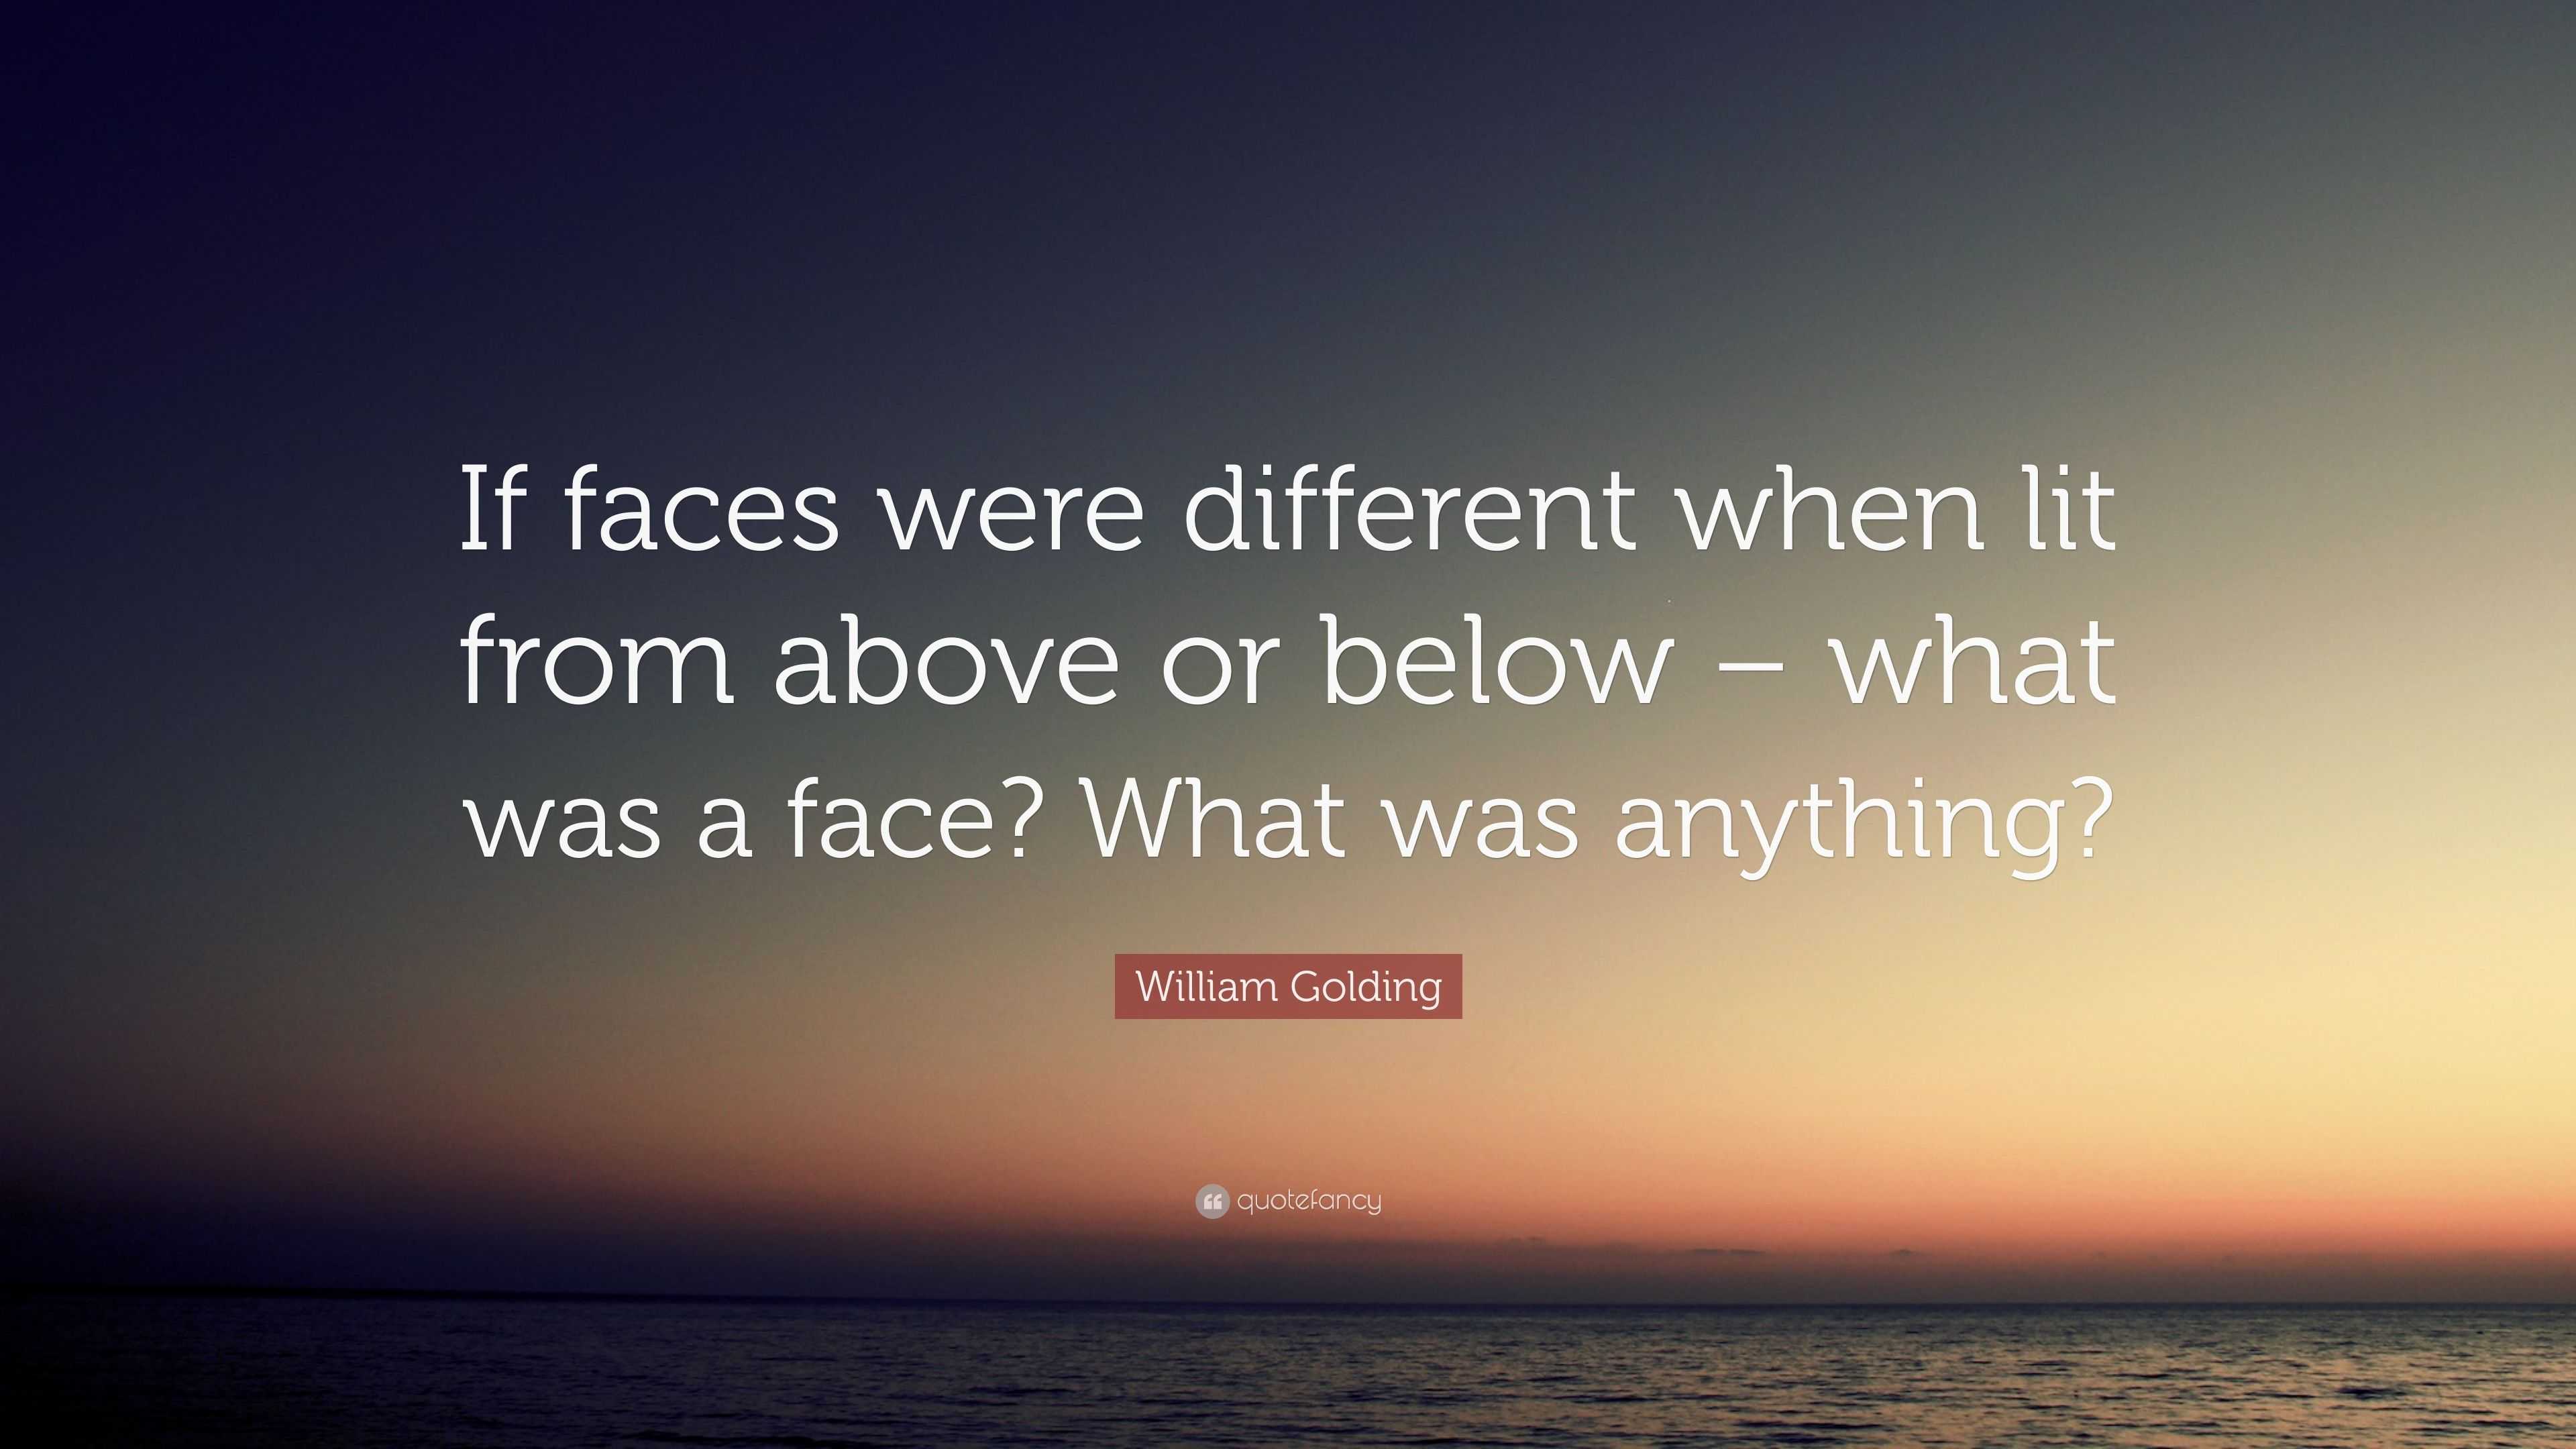 William Golding Quote: “If faces were different when lit from above or ...